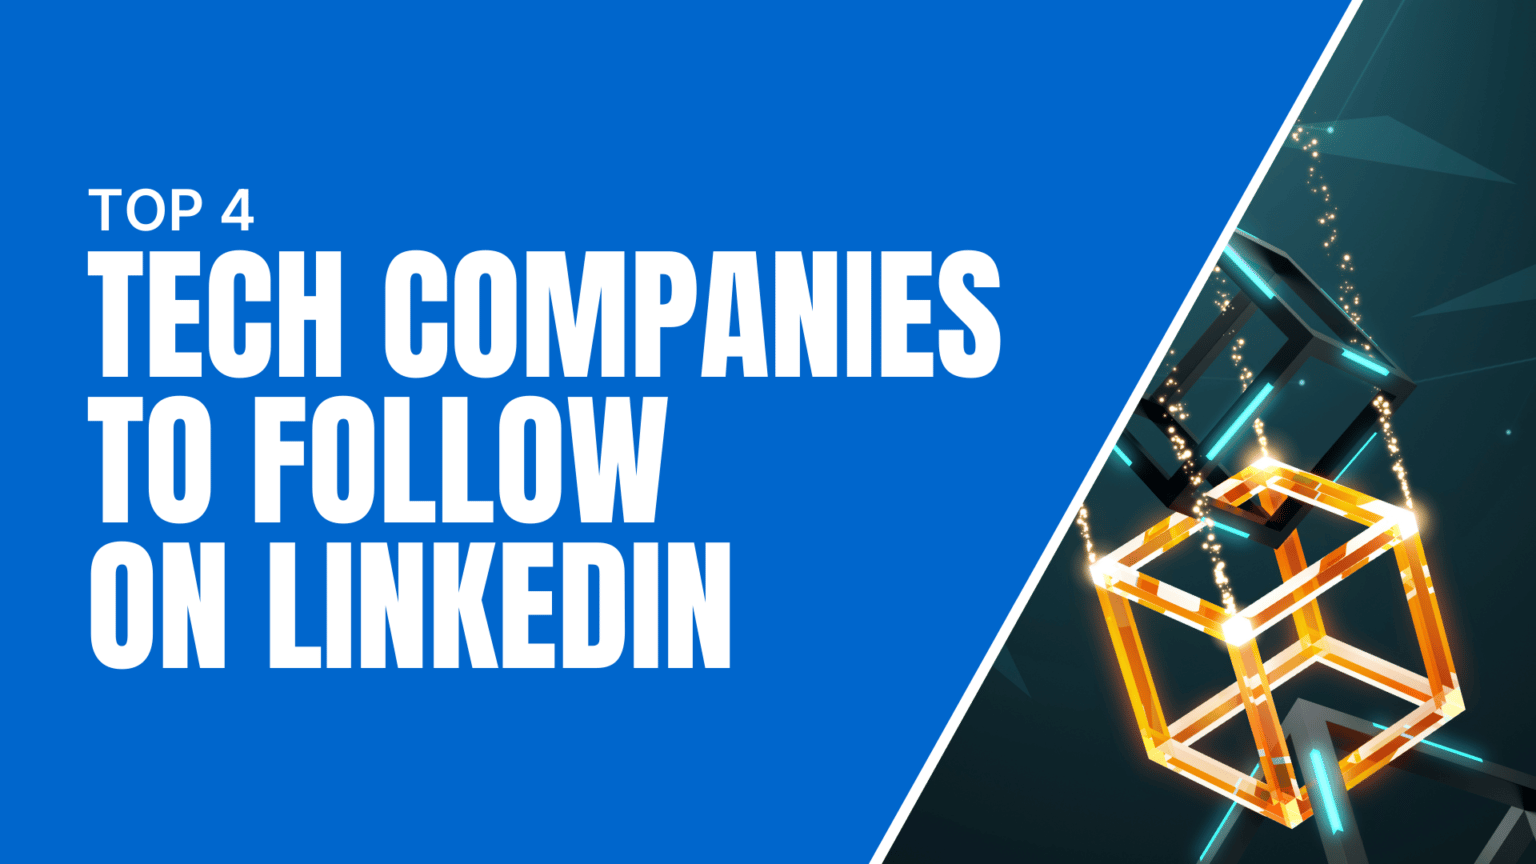 Top 4 Tech Companies to Follow on LinkedIn Featured Image